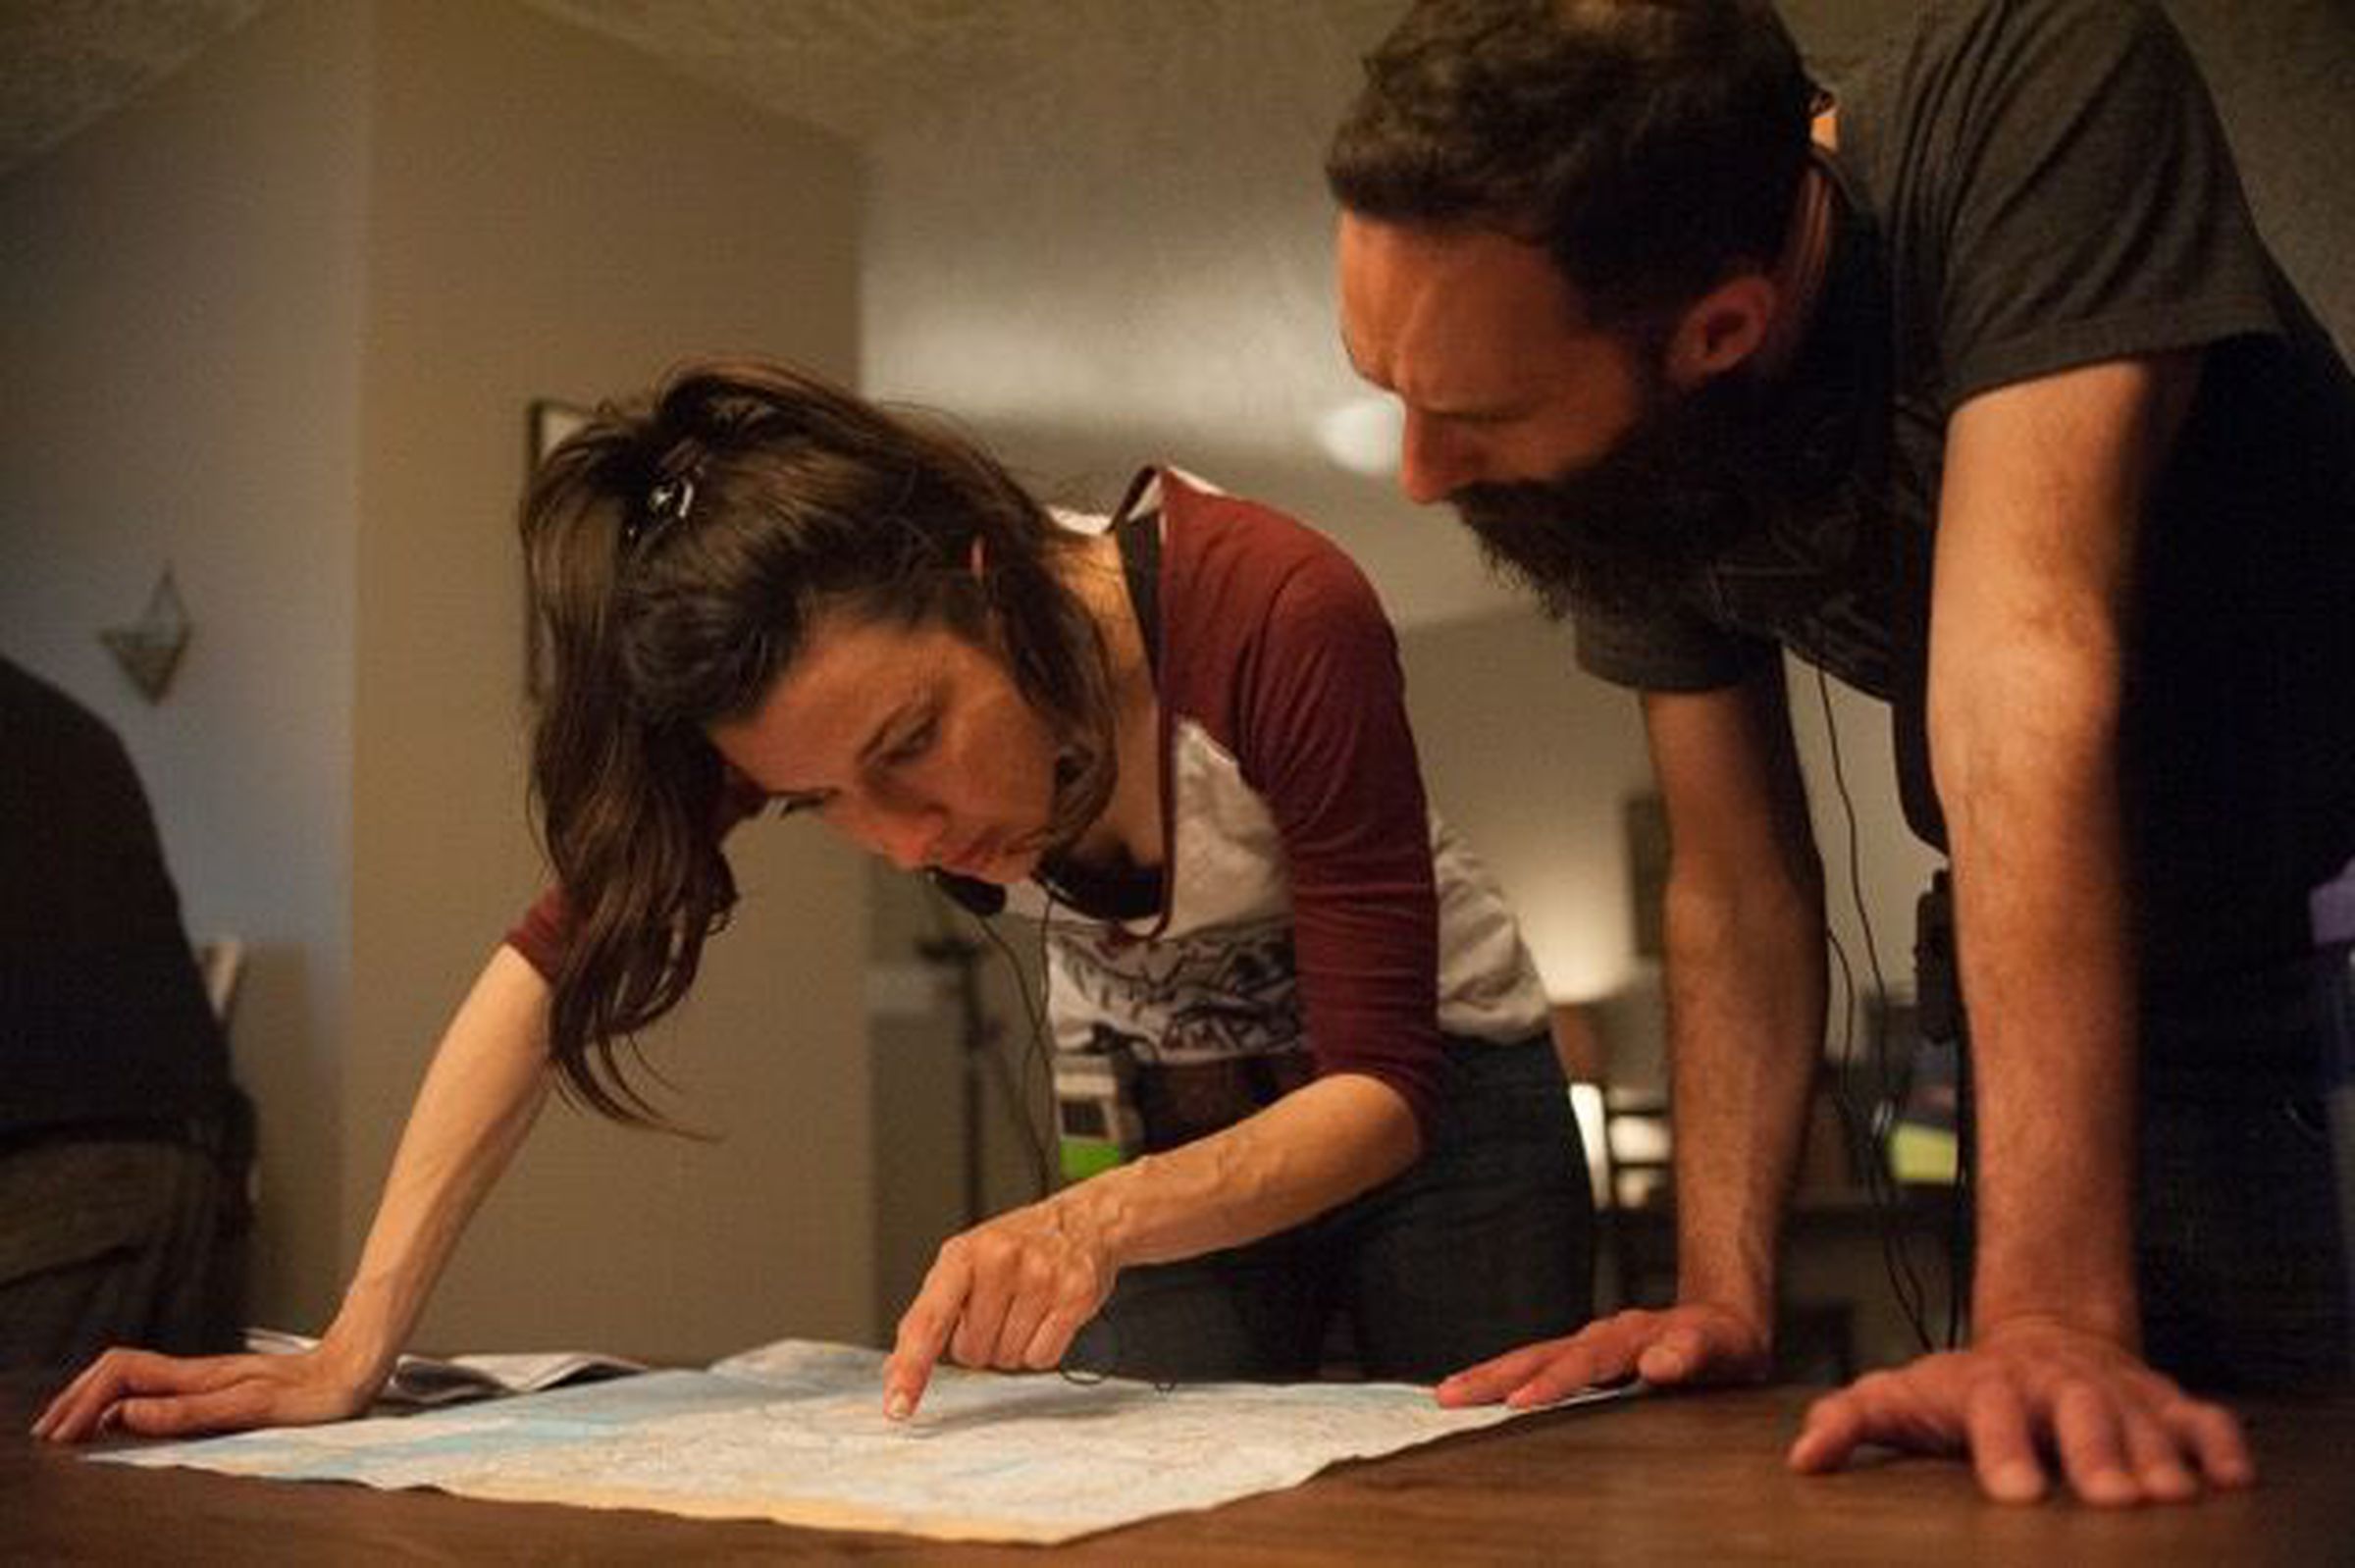  Caroline Labrèche and Steeve Léonard working out a scene from Radius